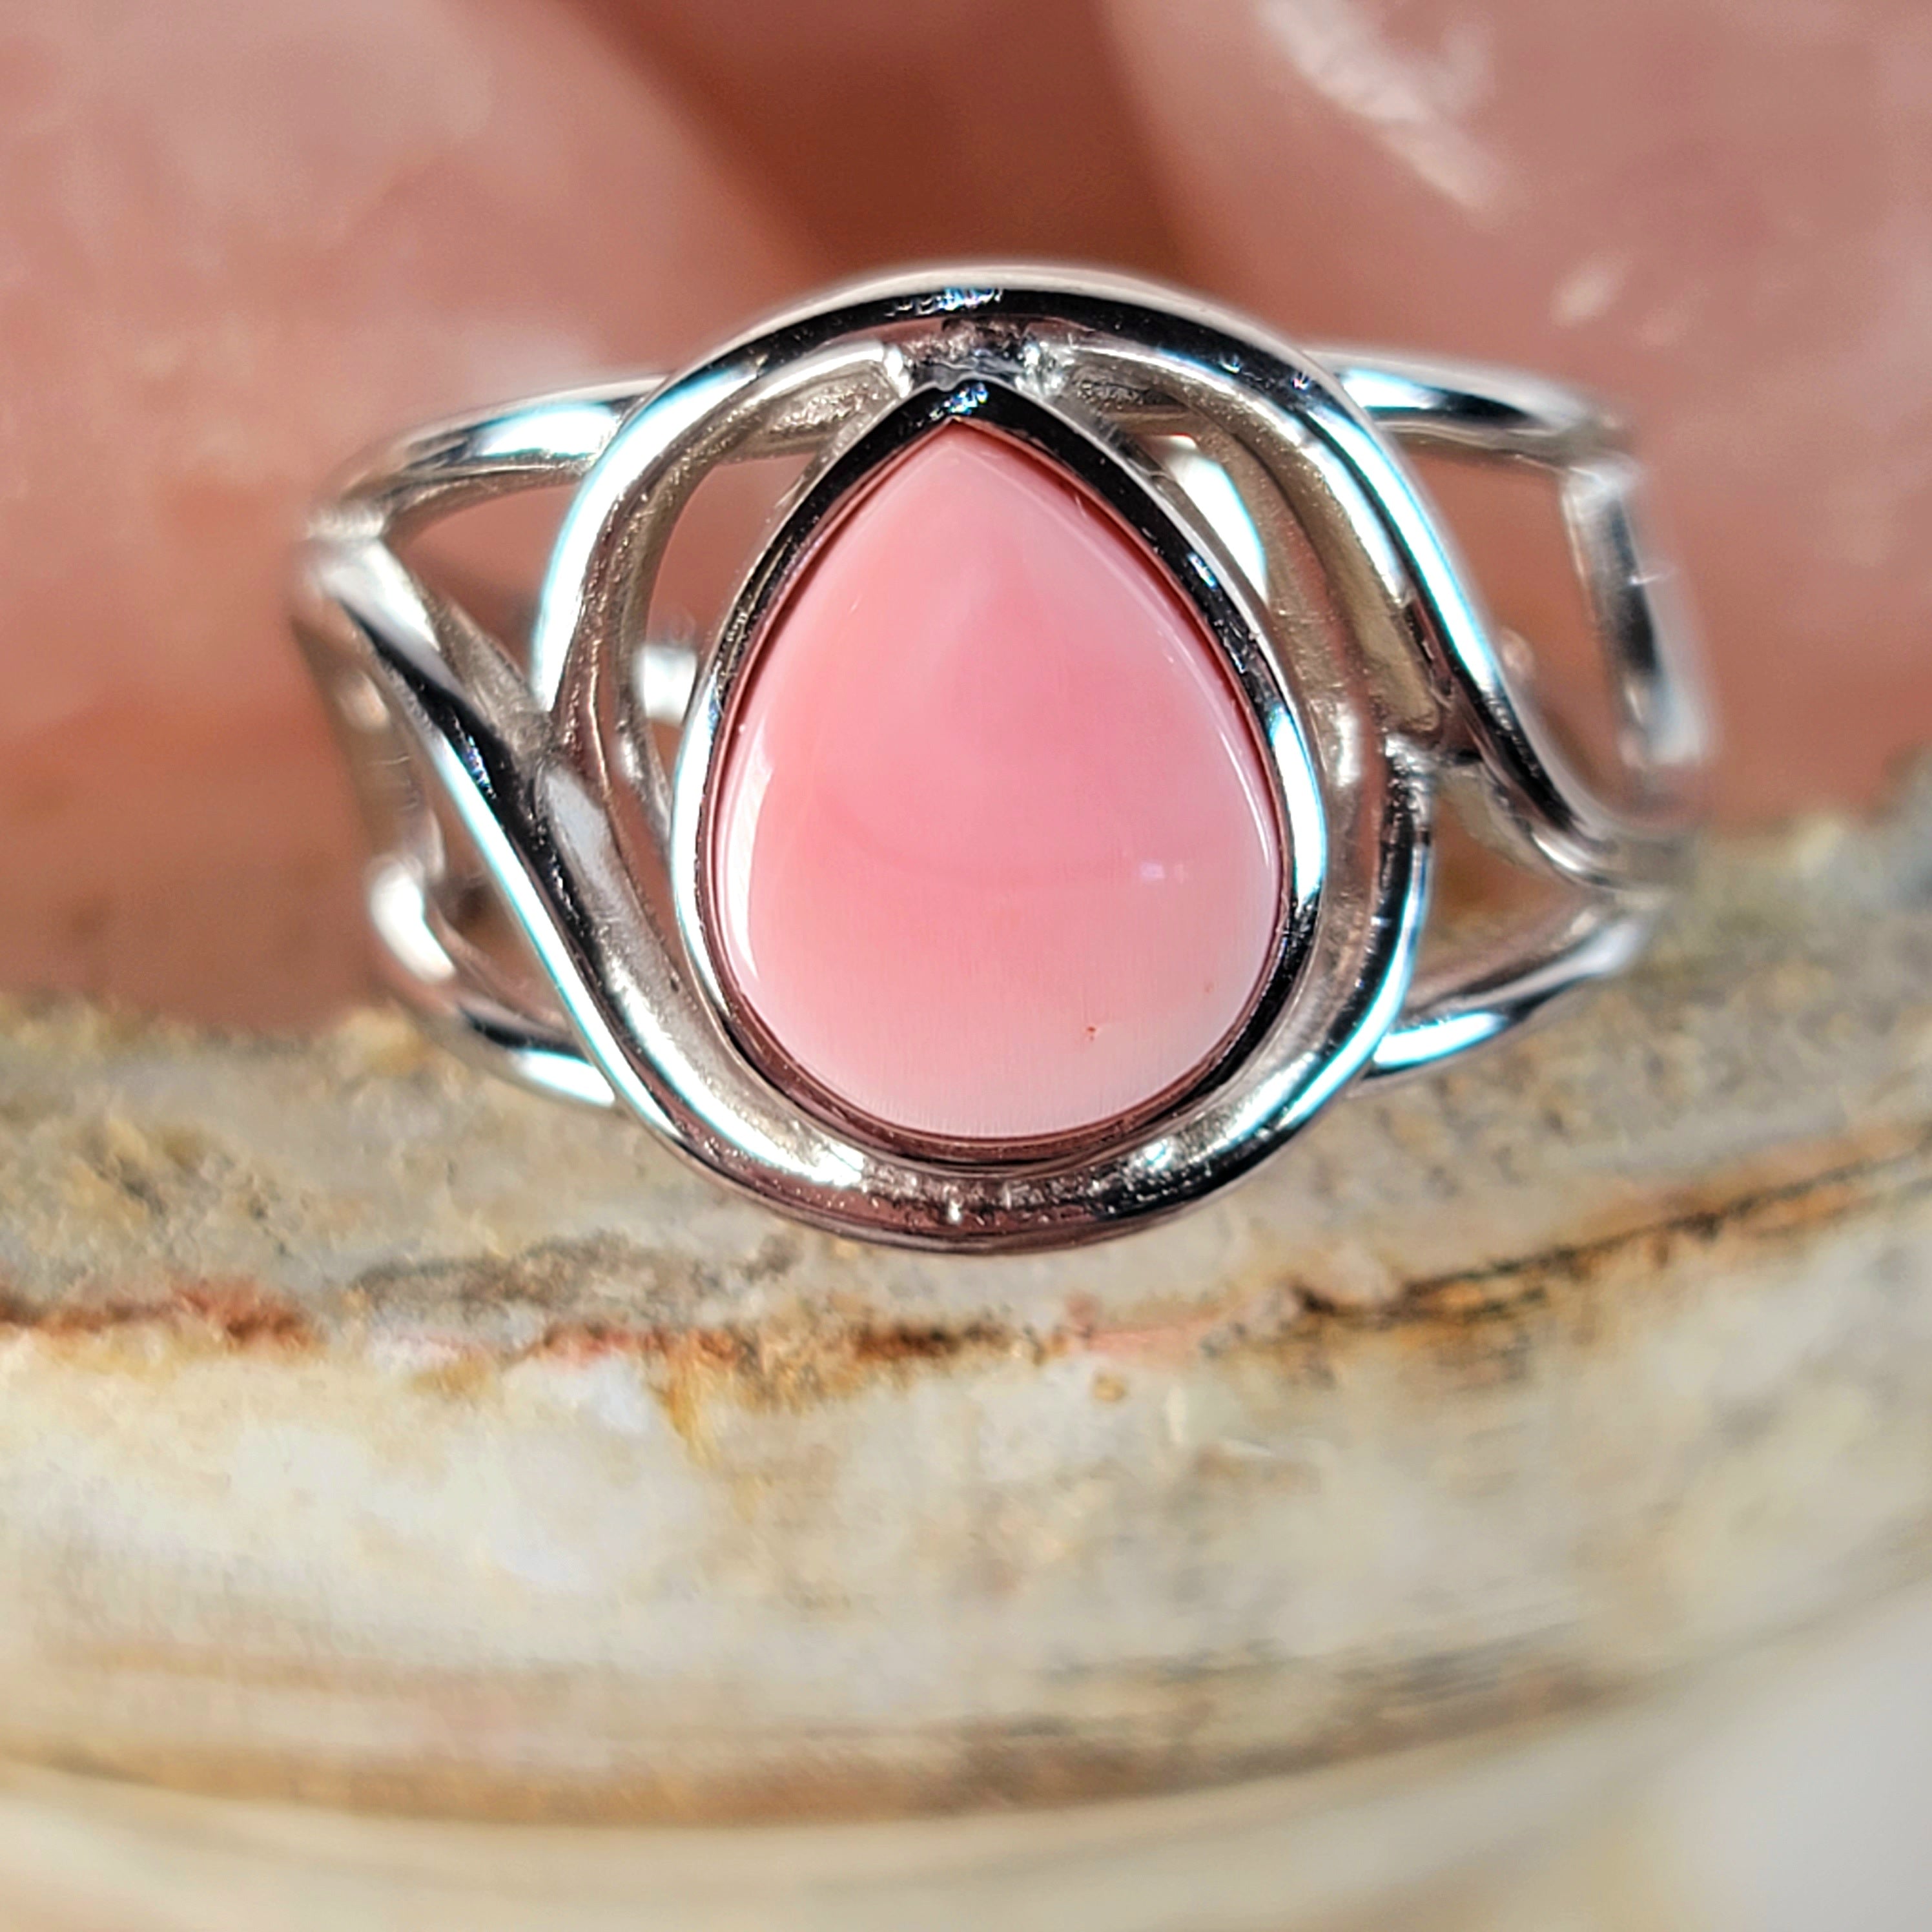 Conch Shell Adjustable Finger Cuff Ring .925 Silver for Purifying Your Environment